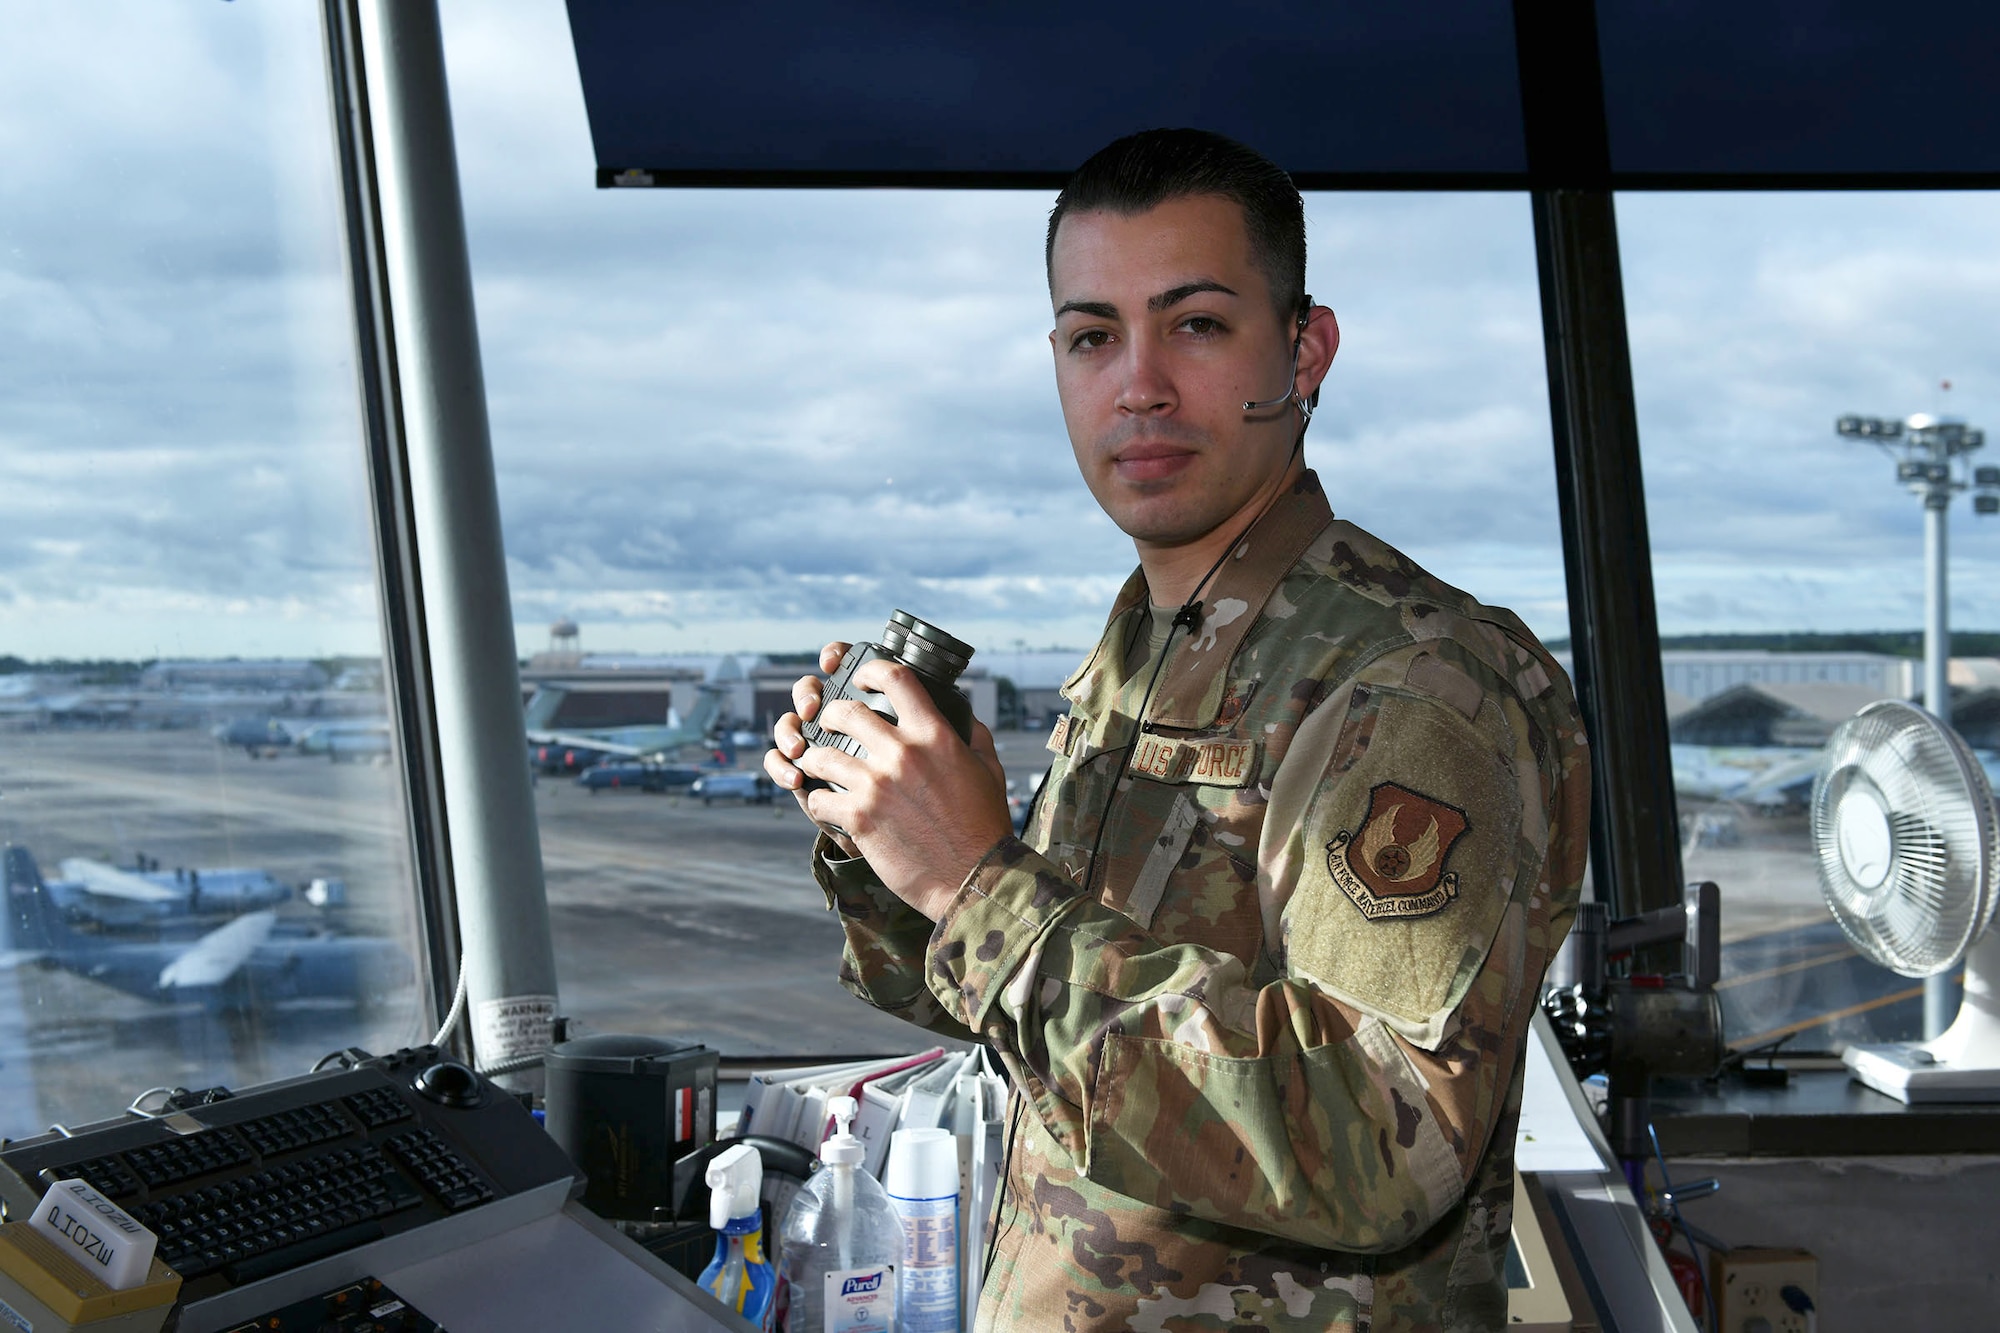 Photo shows an Airman standing inside the air control tower holding binoculars in his hands.